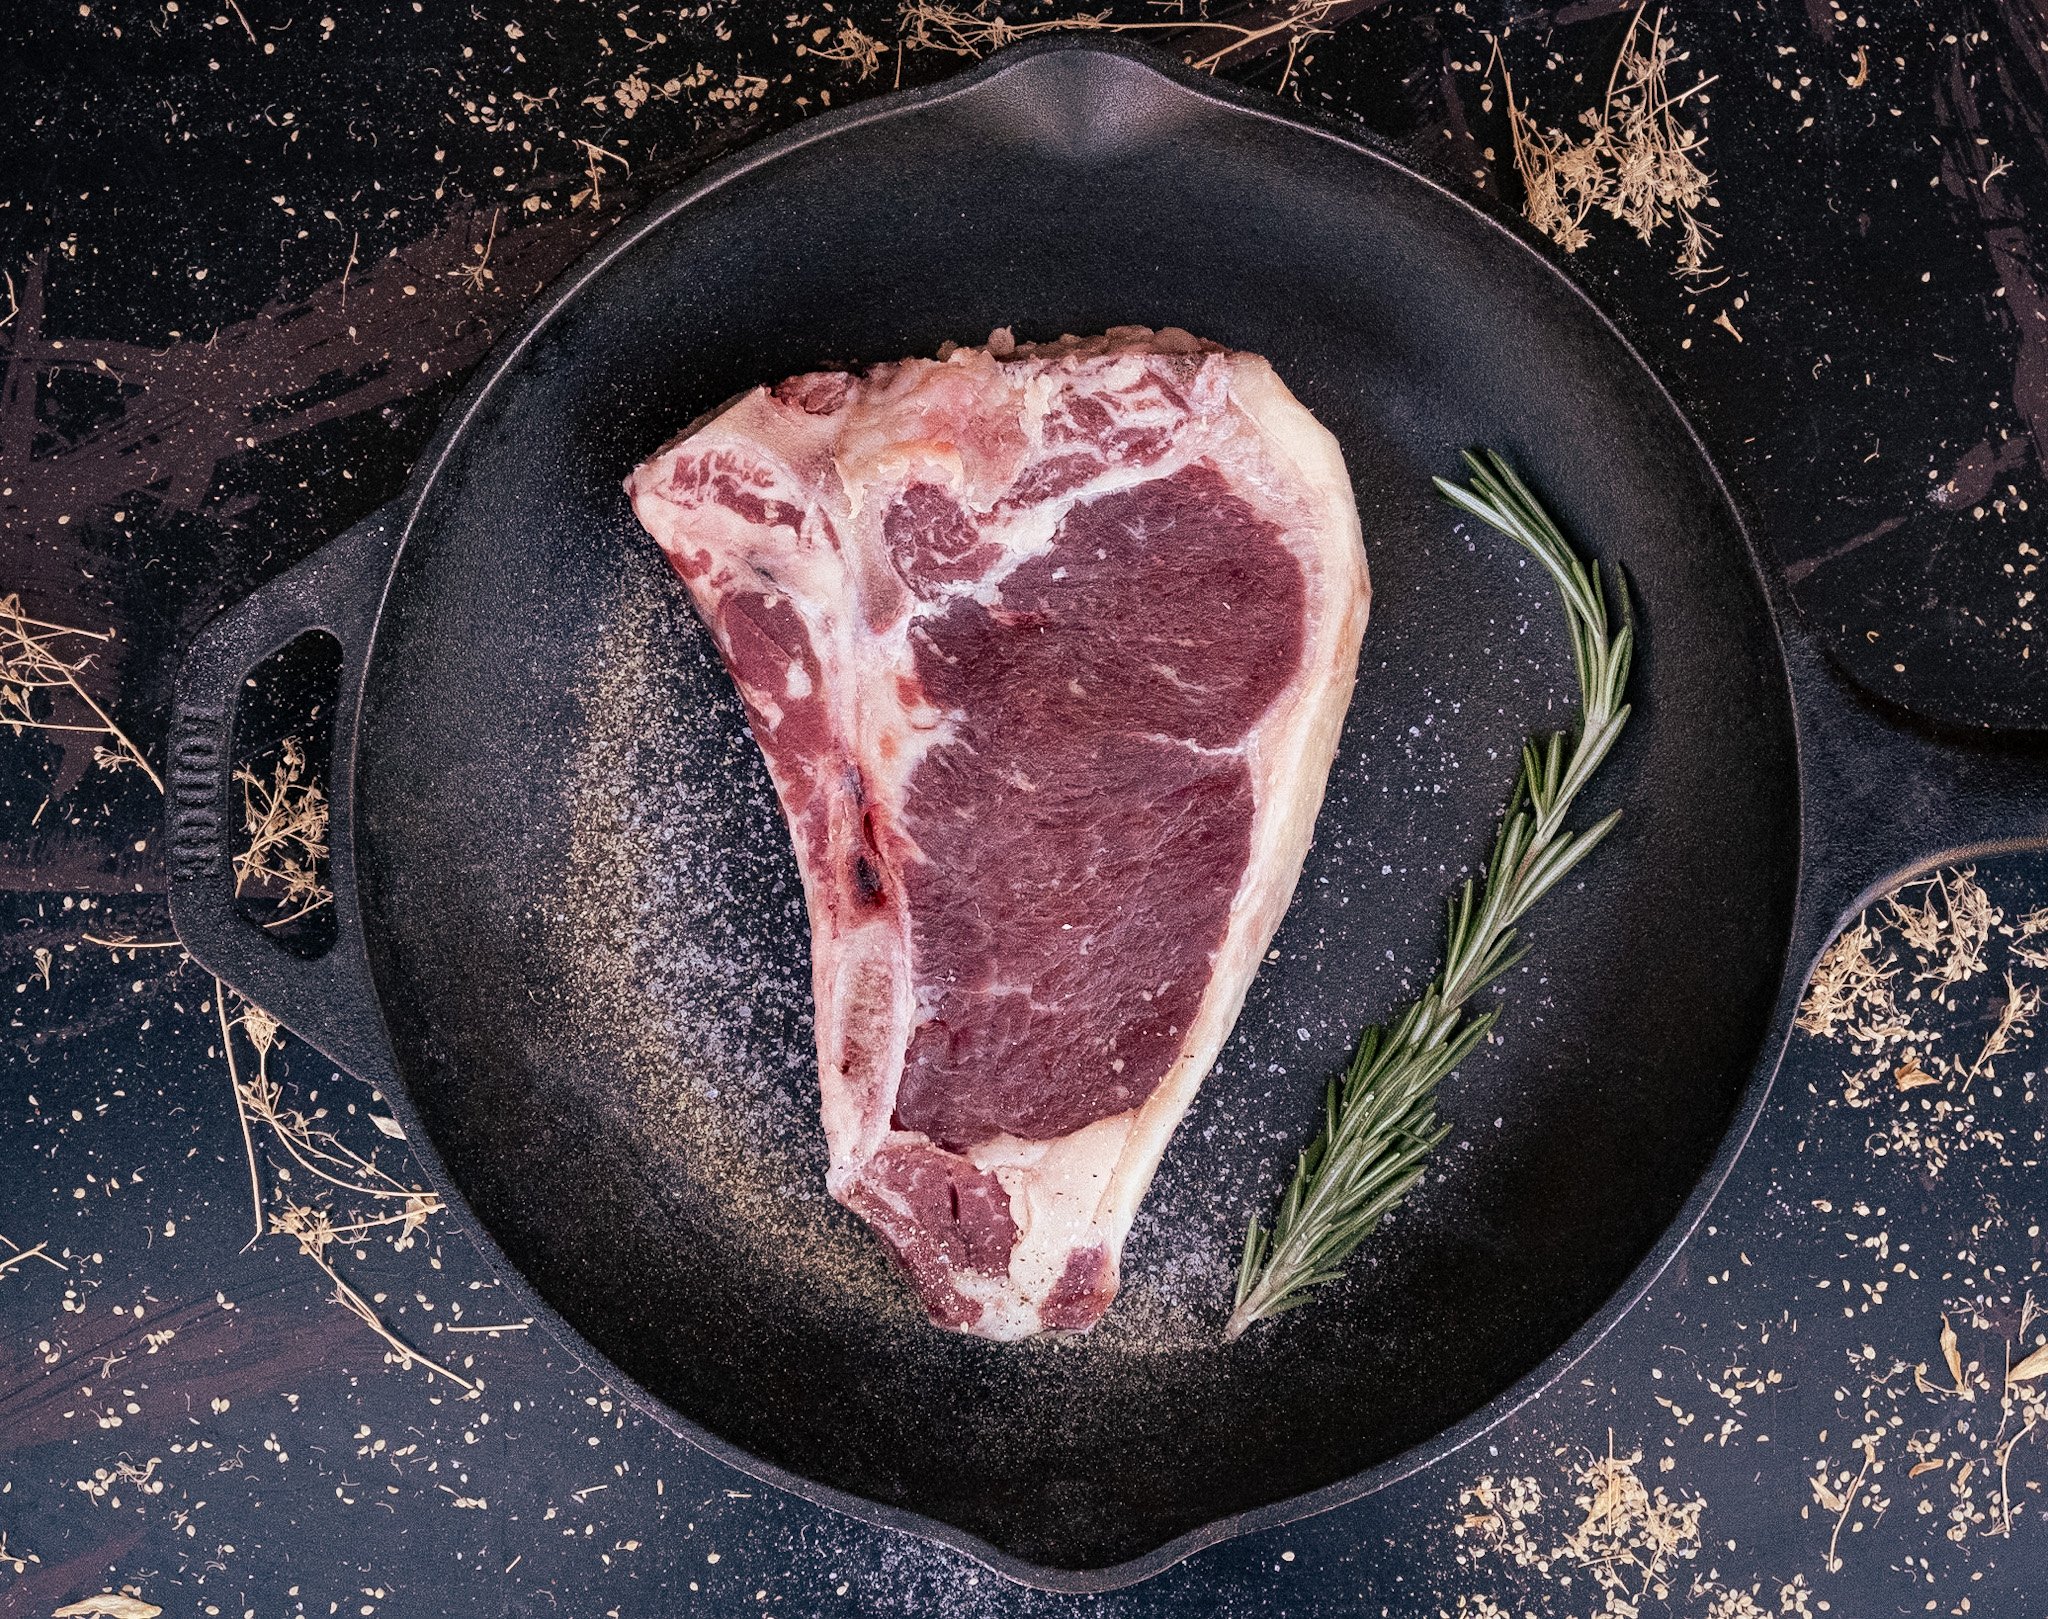 Mother's day is coming up and what better way to treat your mom than to give her quality food and then maybe even cook it for her. You still have time to order our home-raised grassfed and finished dry-aged beef before our next beef delivery up and d